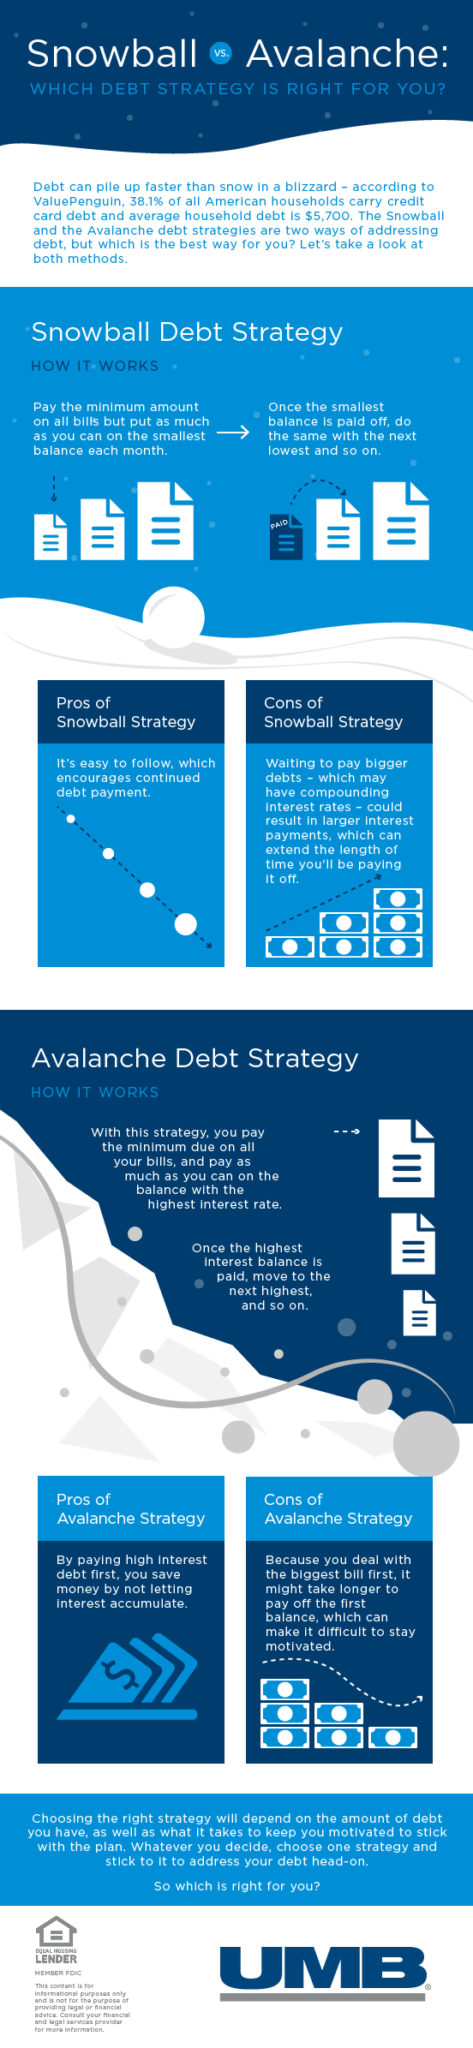 Debt Strategy infographic 10 17